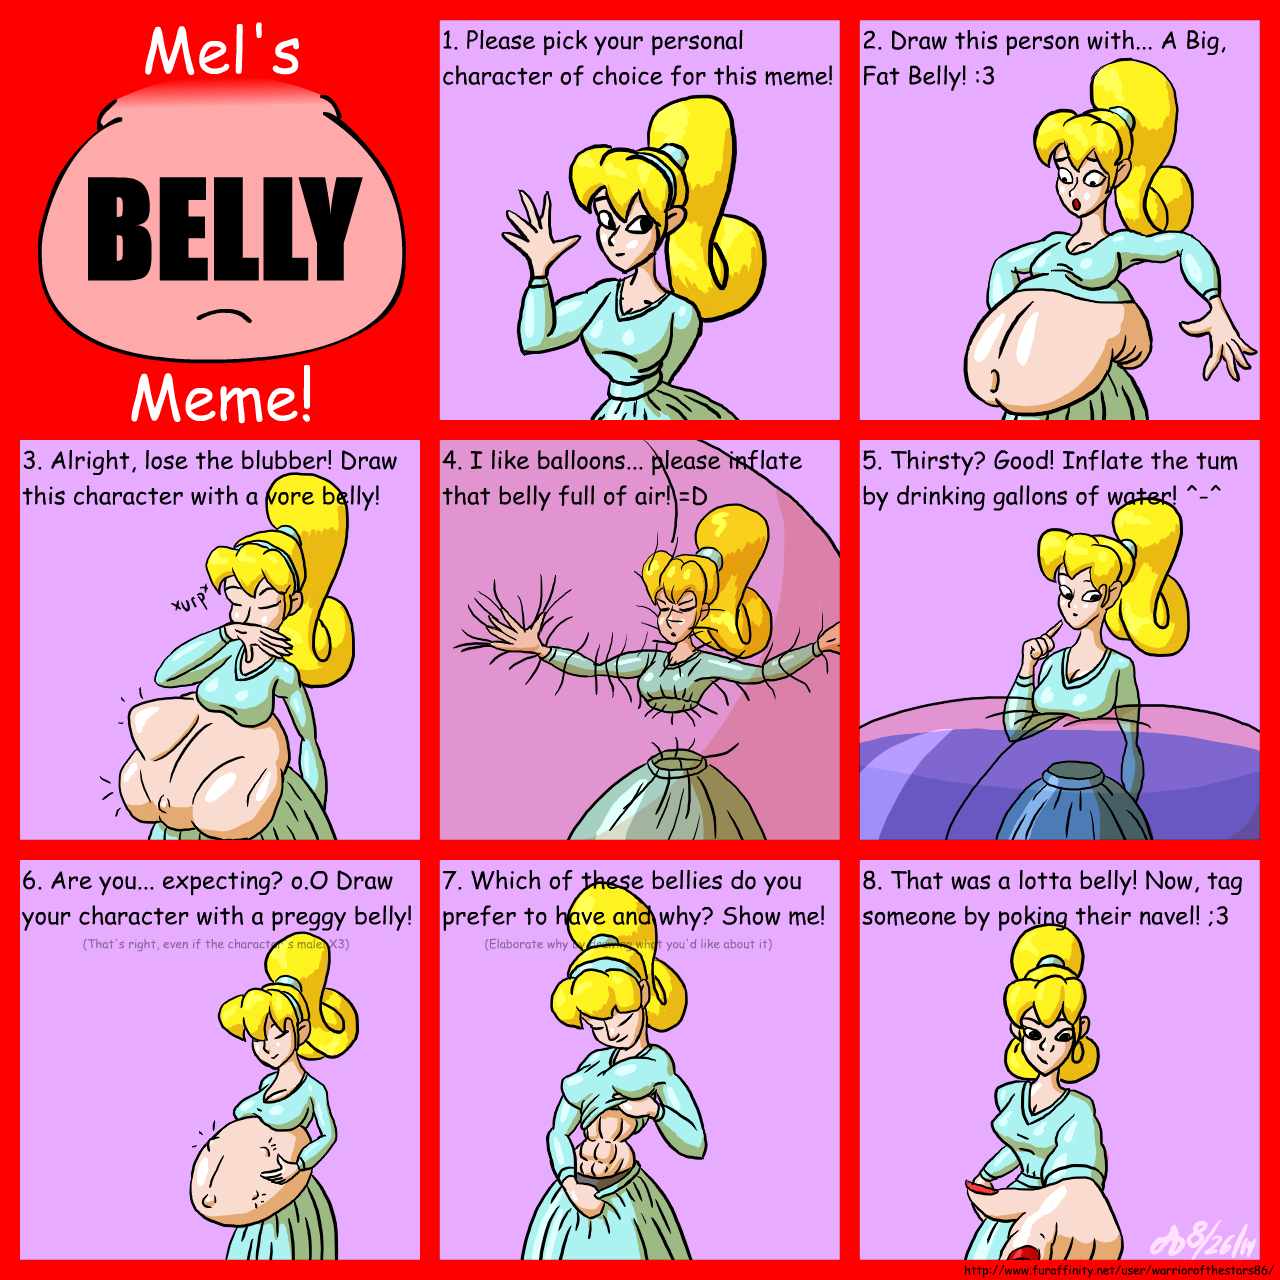 Belly Meme Thing v.2 - Now in Color.